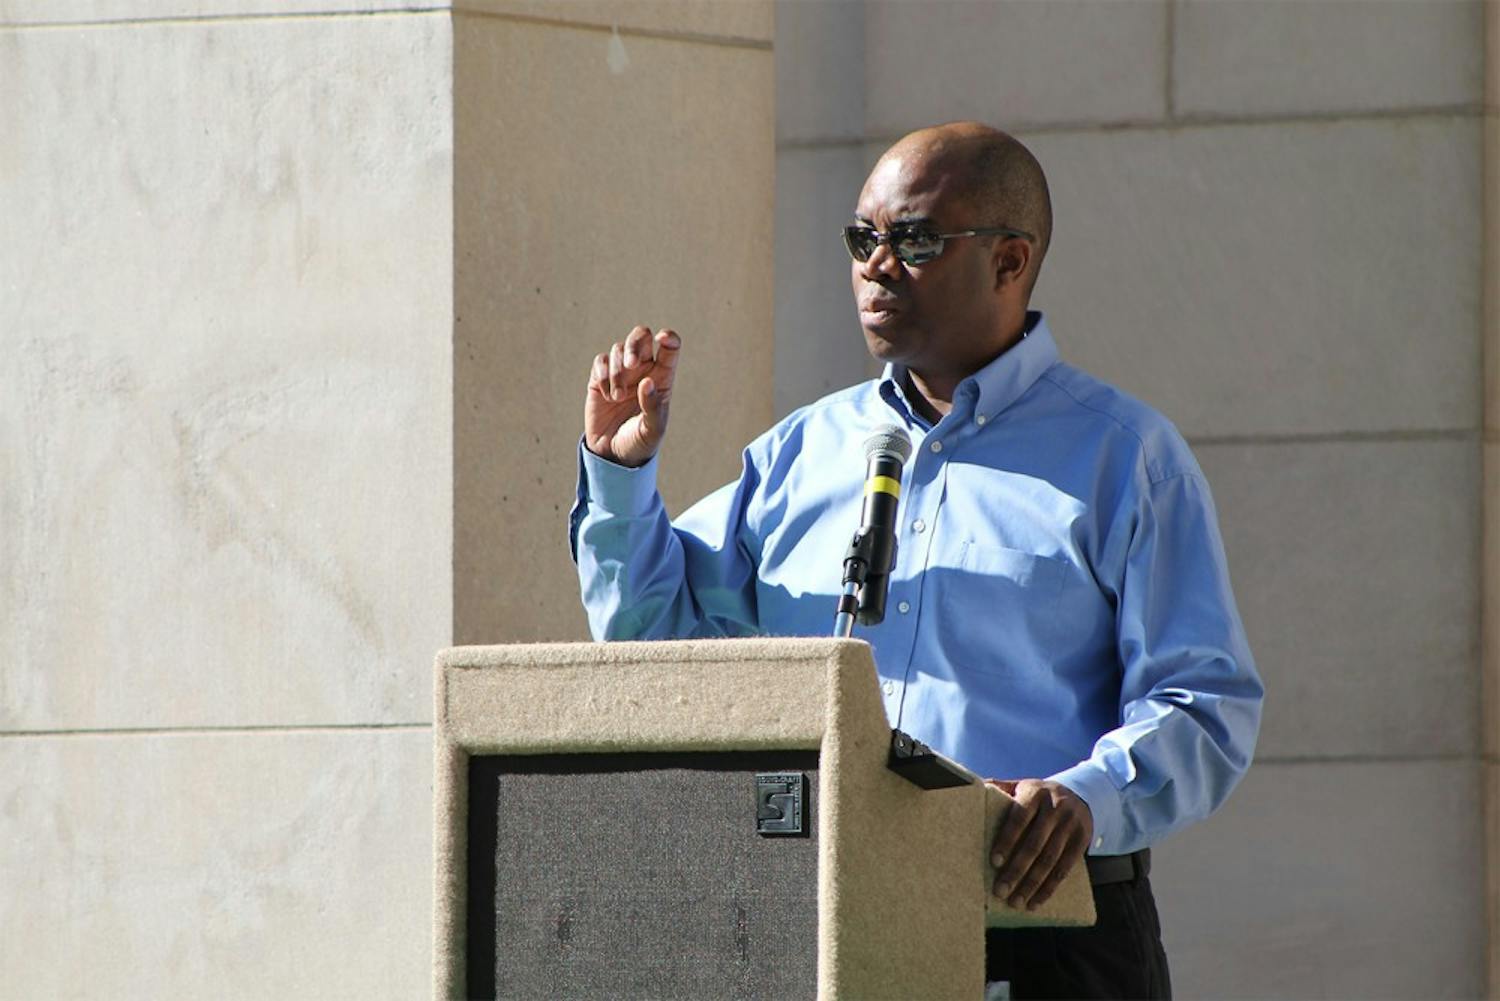 William Thorpe, son of Bill Thorpe spoke at the Celebration of Our Peace and Justice Legacy in front of the Post Office-Courthouse on Oct. 11, 2015.